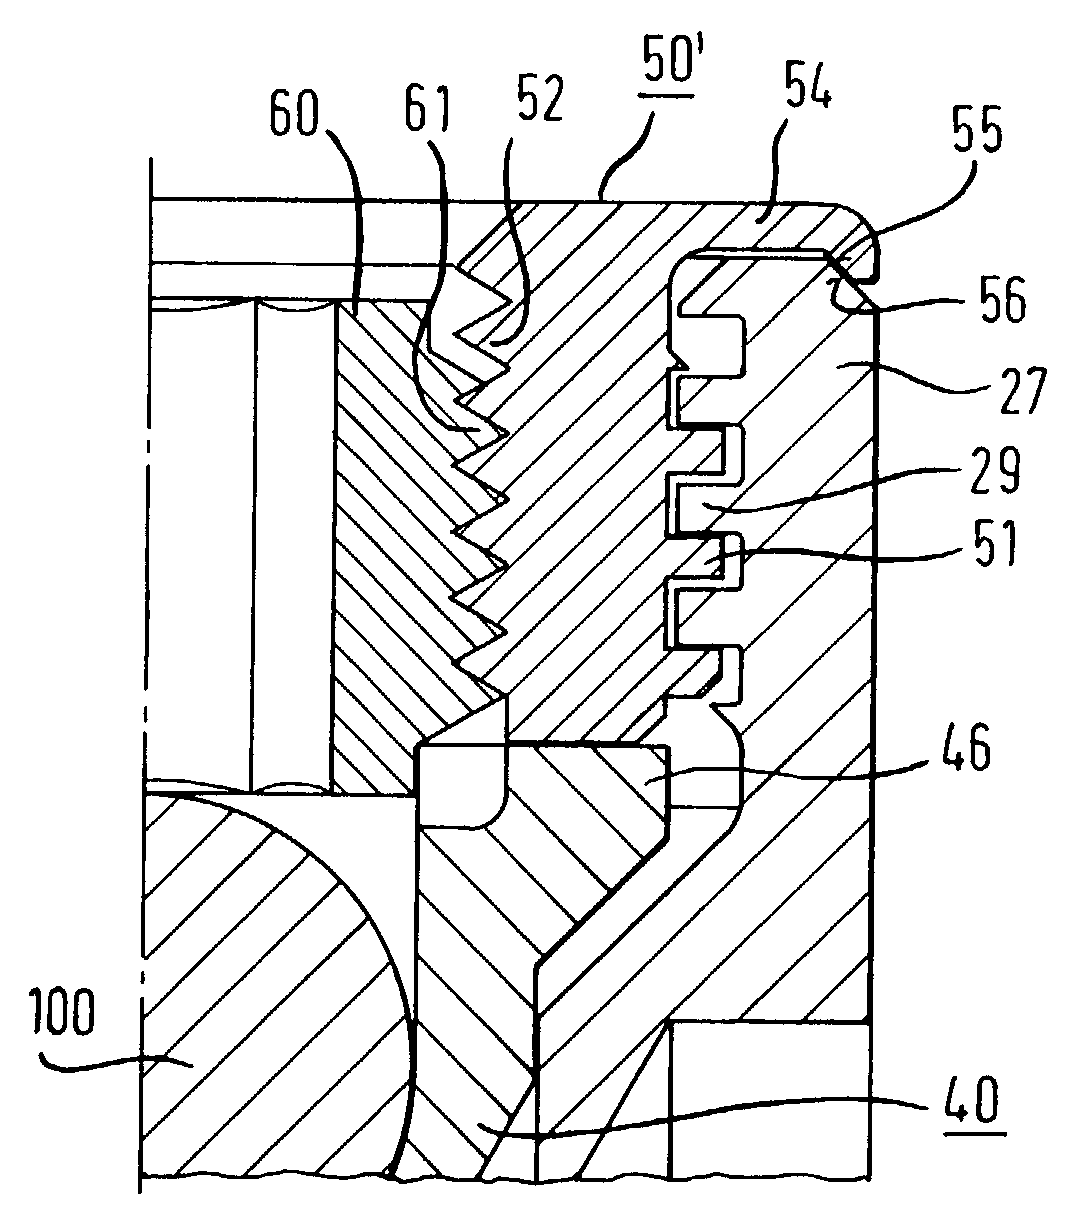 Element with a shank and a holding element connected to it for connecting to a rod